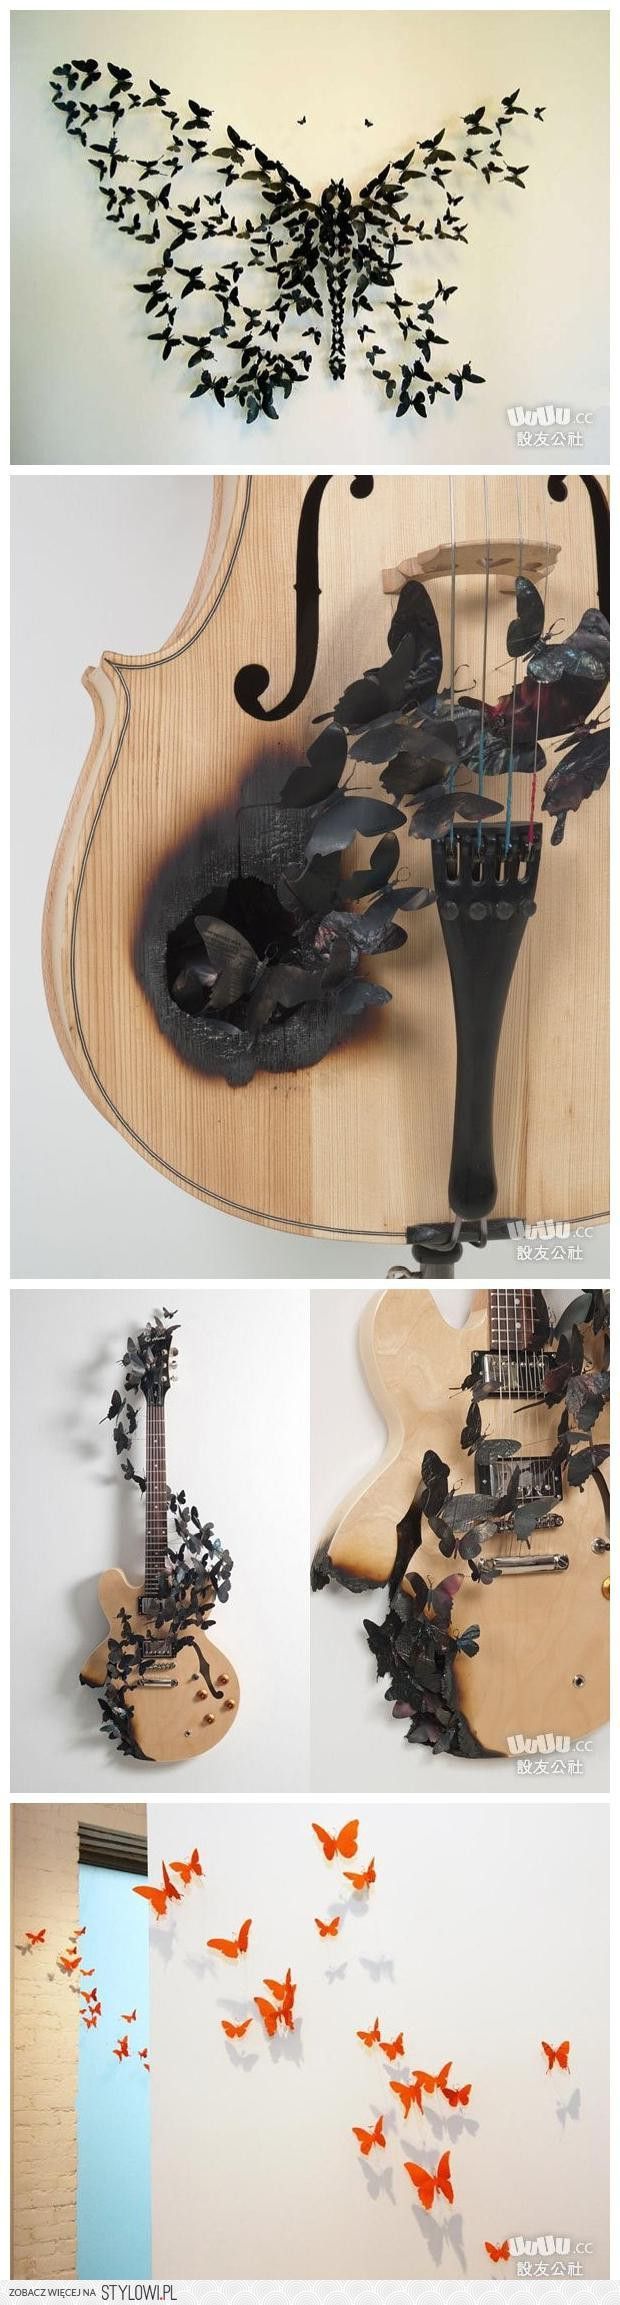 butterfly craft diy ideas. Pretty sure I could never do that to a guitar. But its beautiful!